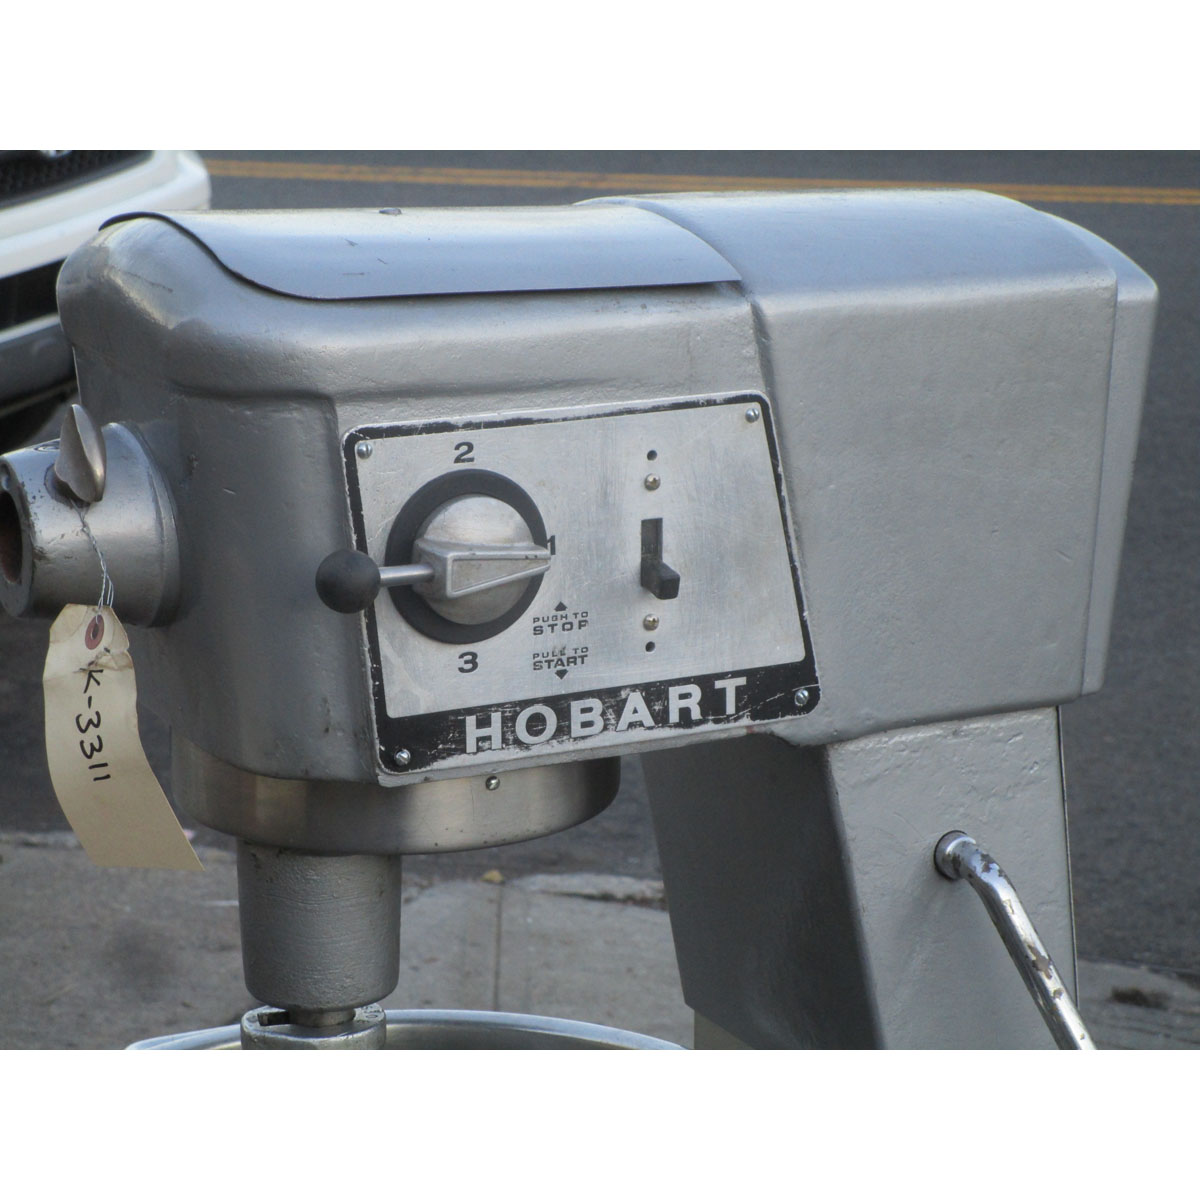 Hobart D300 30 Quart Mixer, Used Great Condition image 3